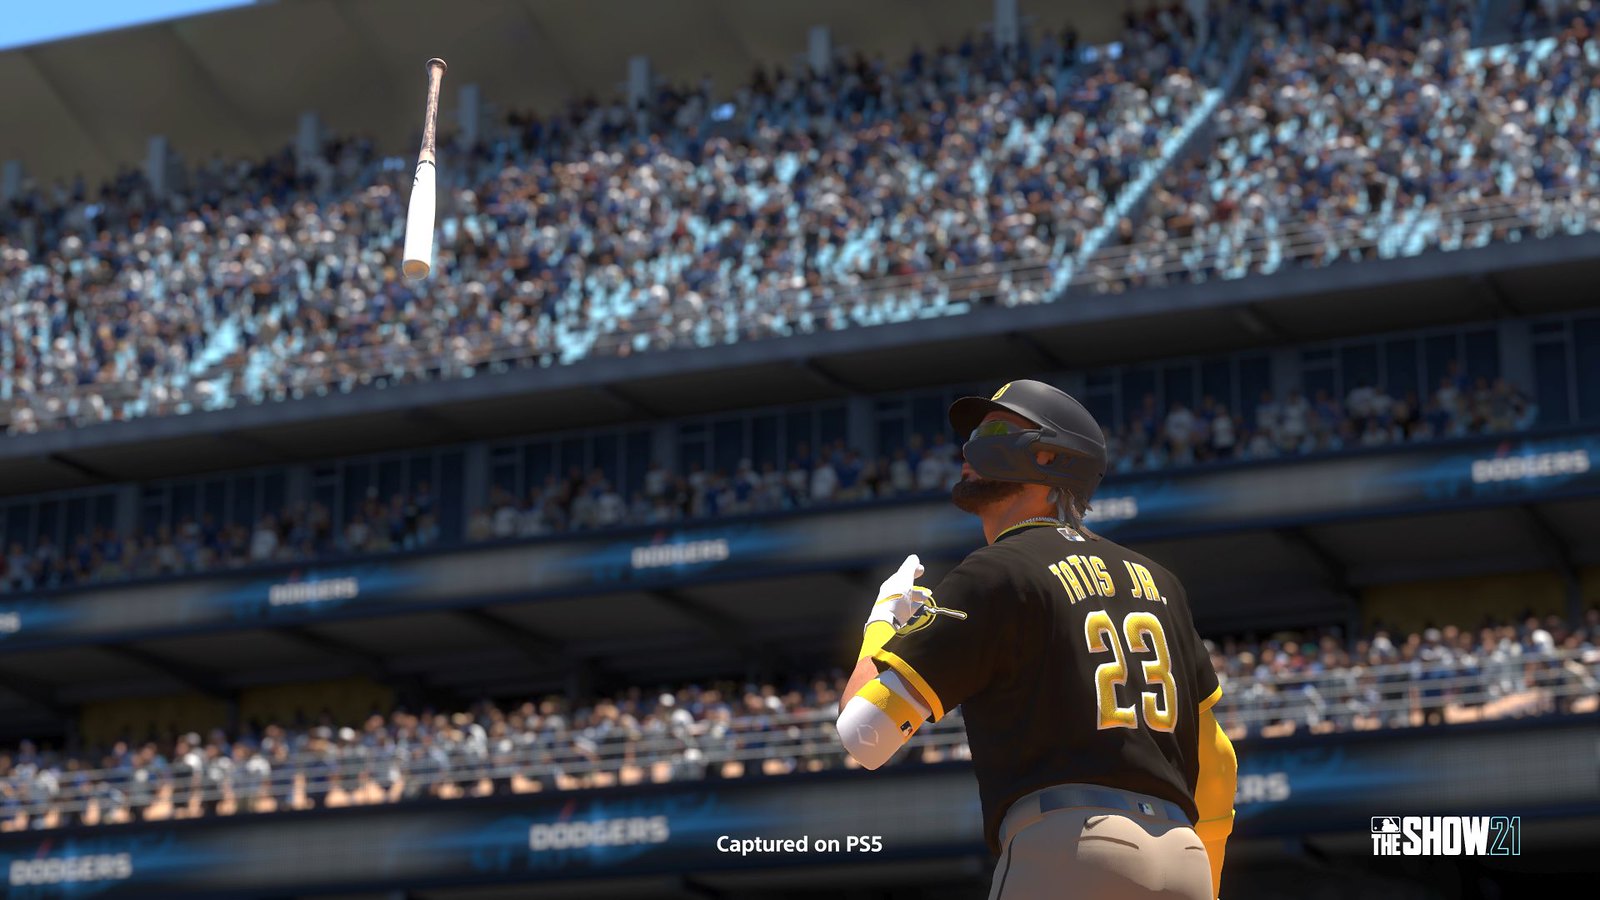 Does MLB The Show 21 Has Ultimate Team Game Mode?